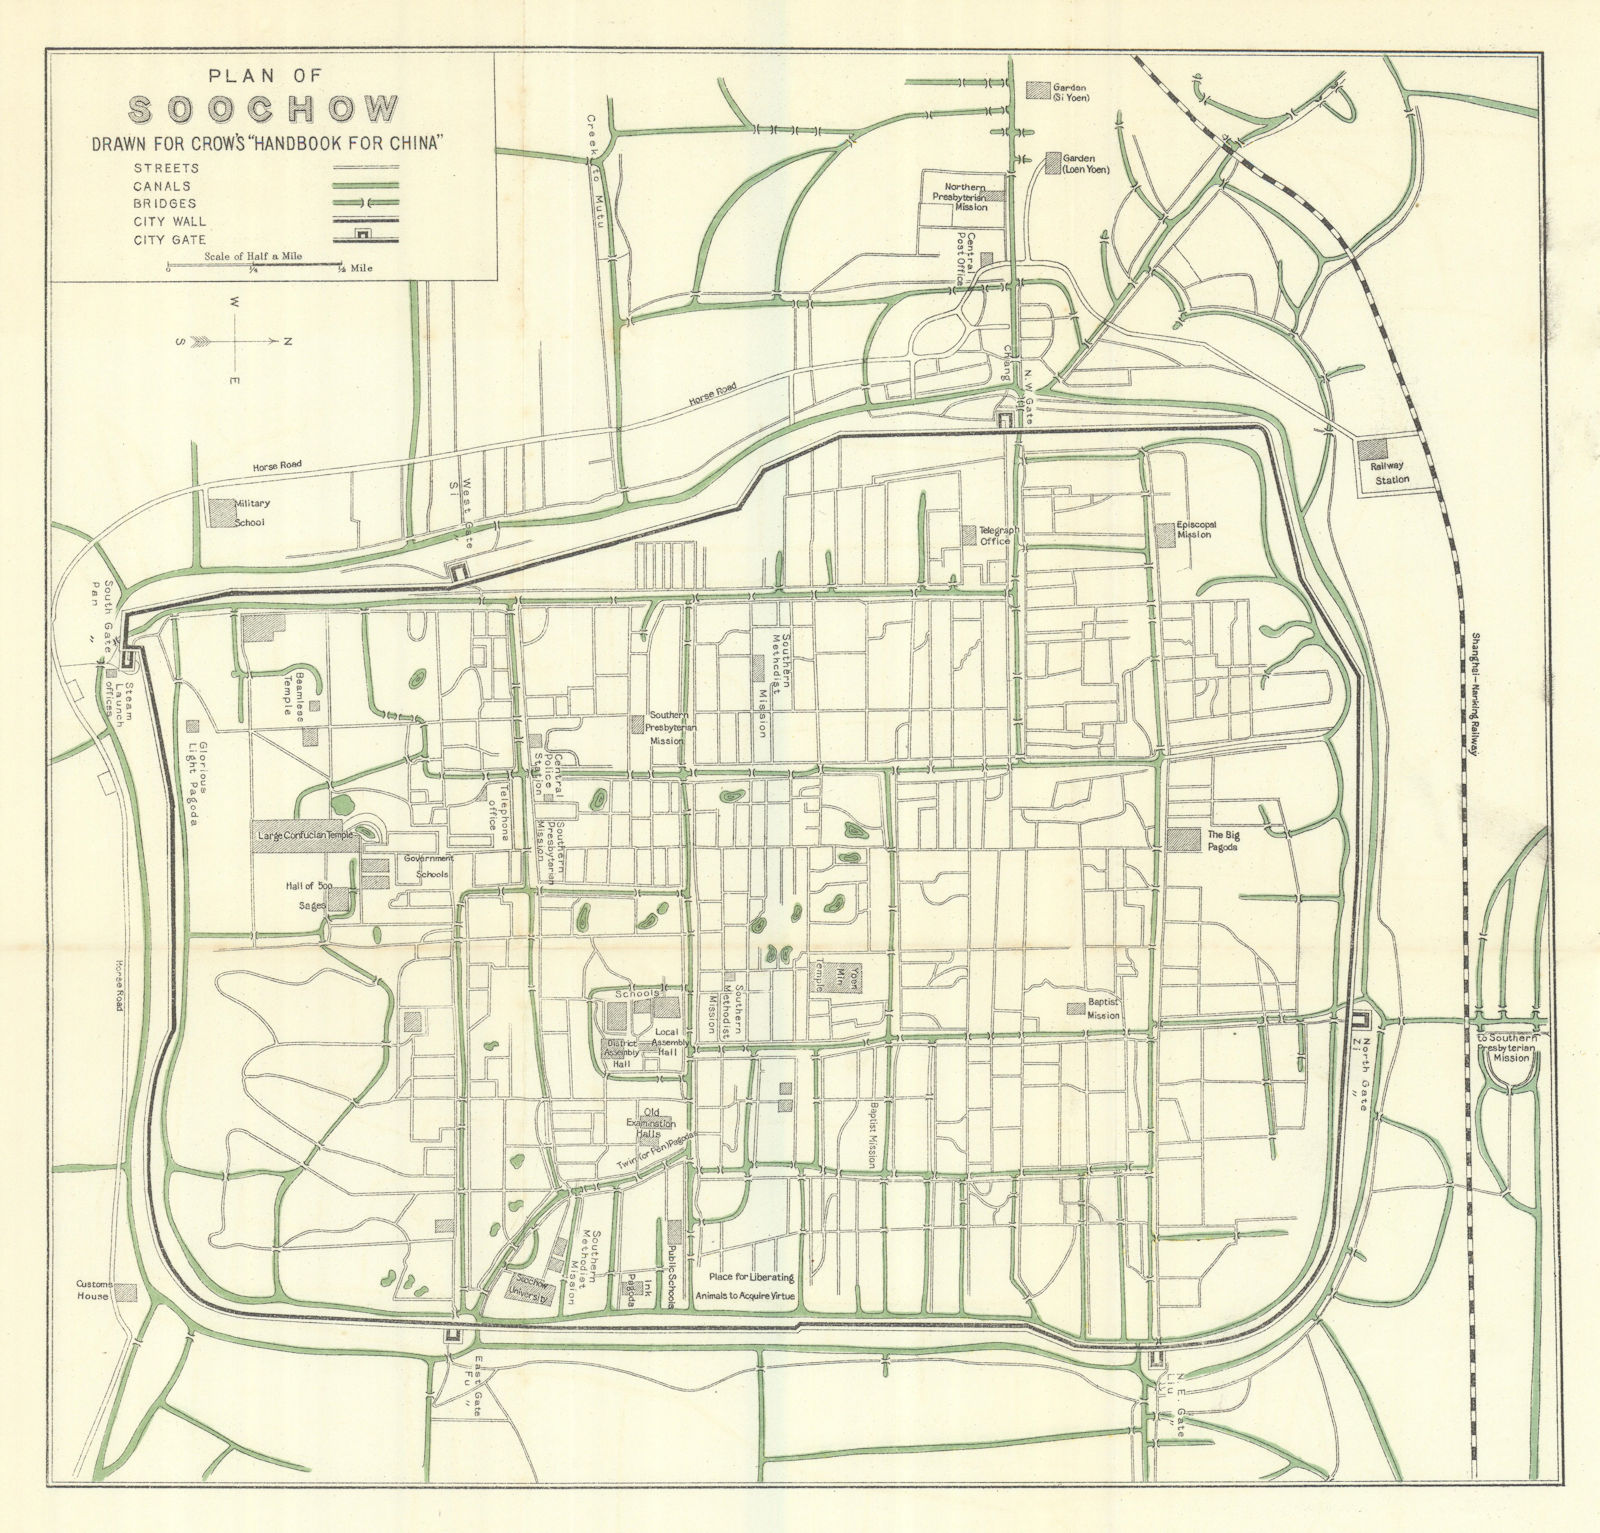 Associate Product City plan of Soochow by Carl Crow. Suzhou, China 1921 old antique map chart